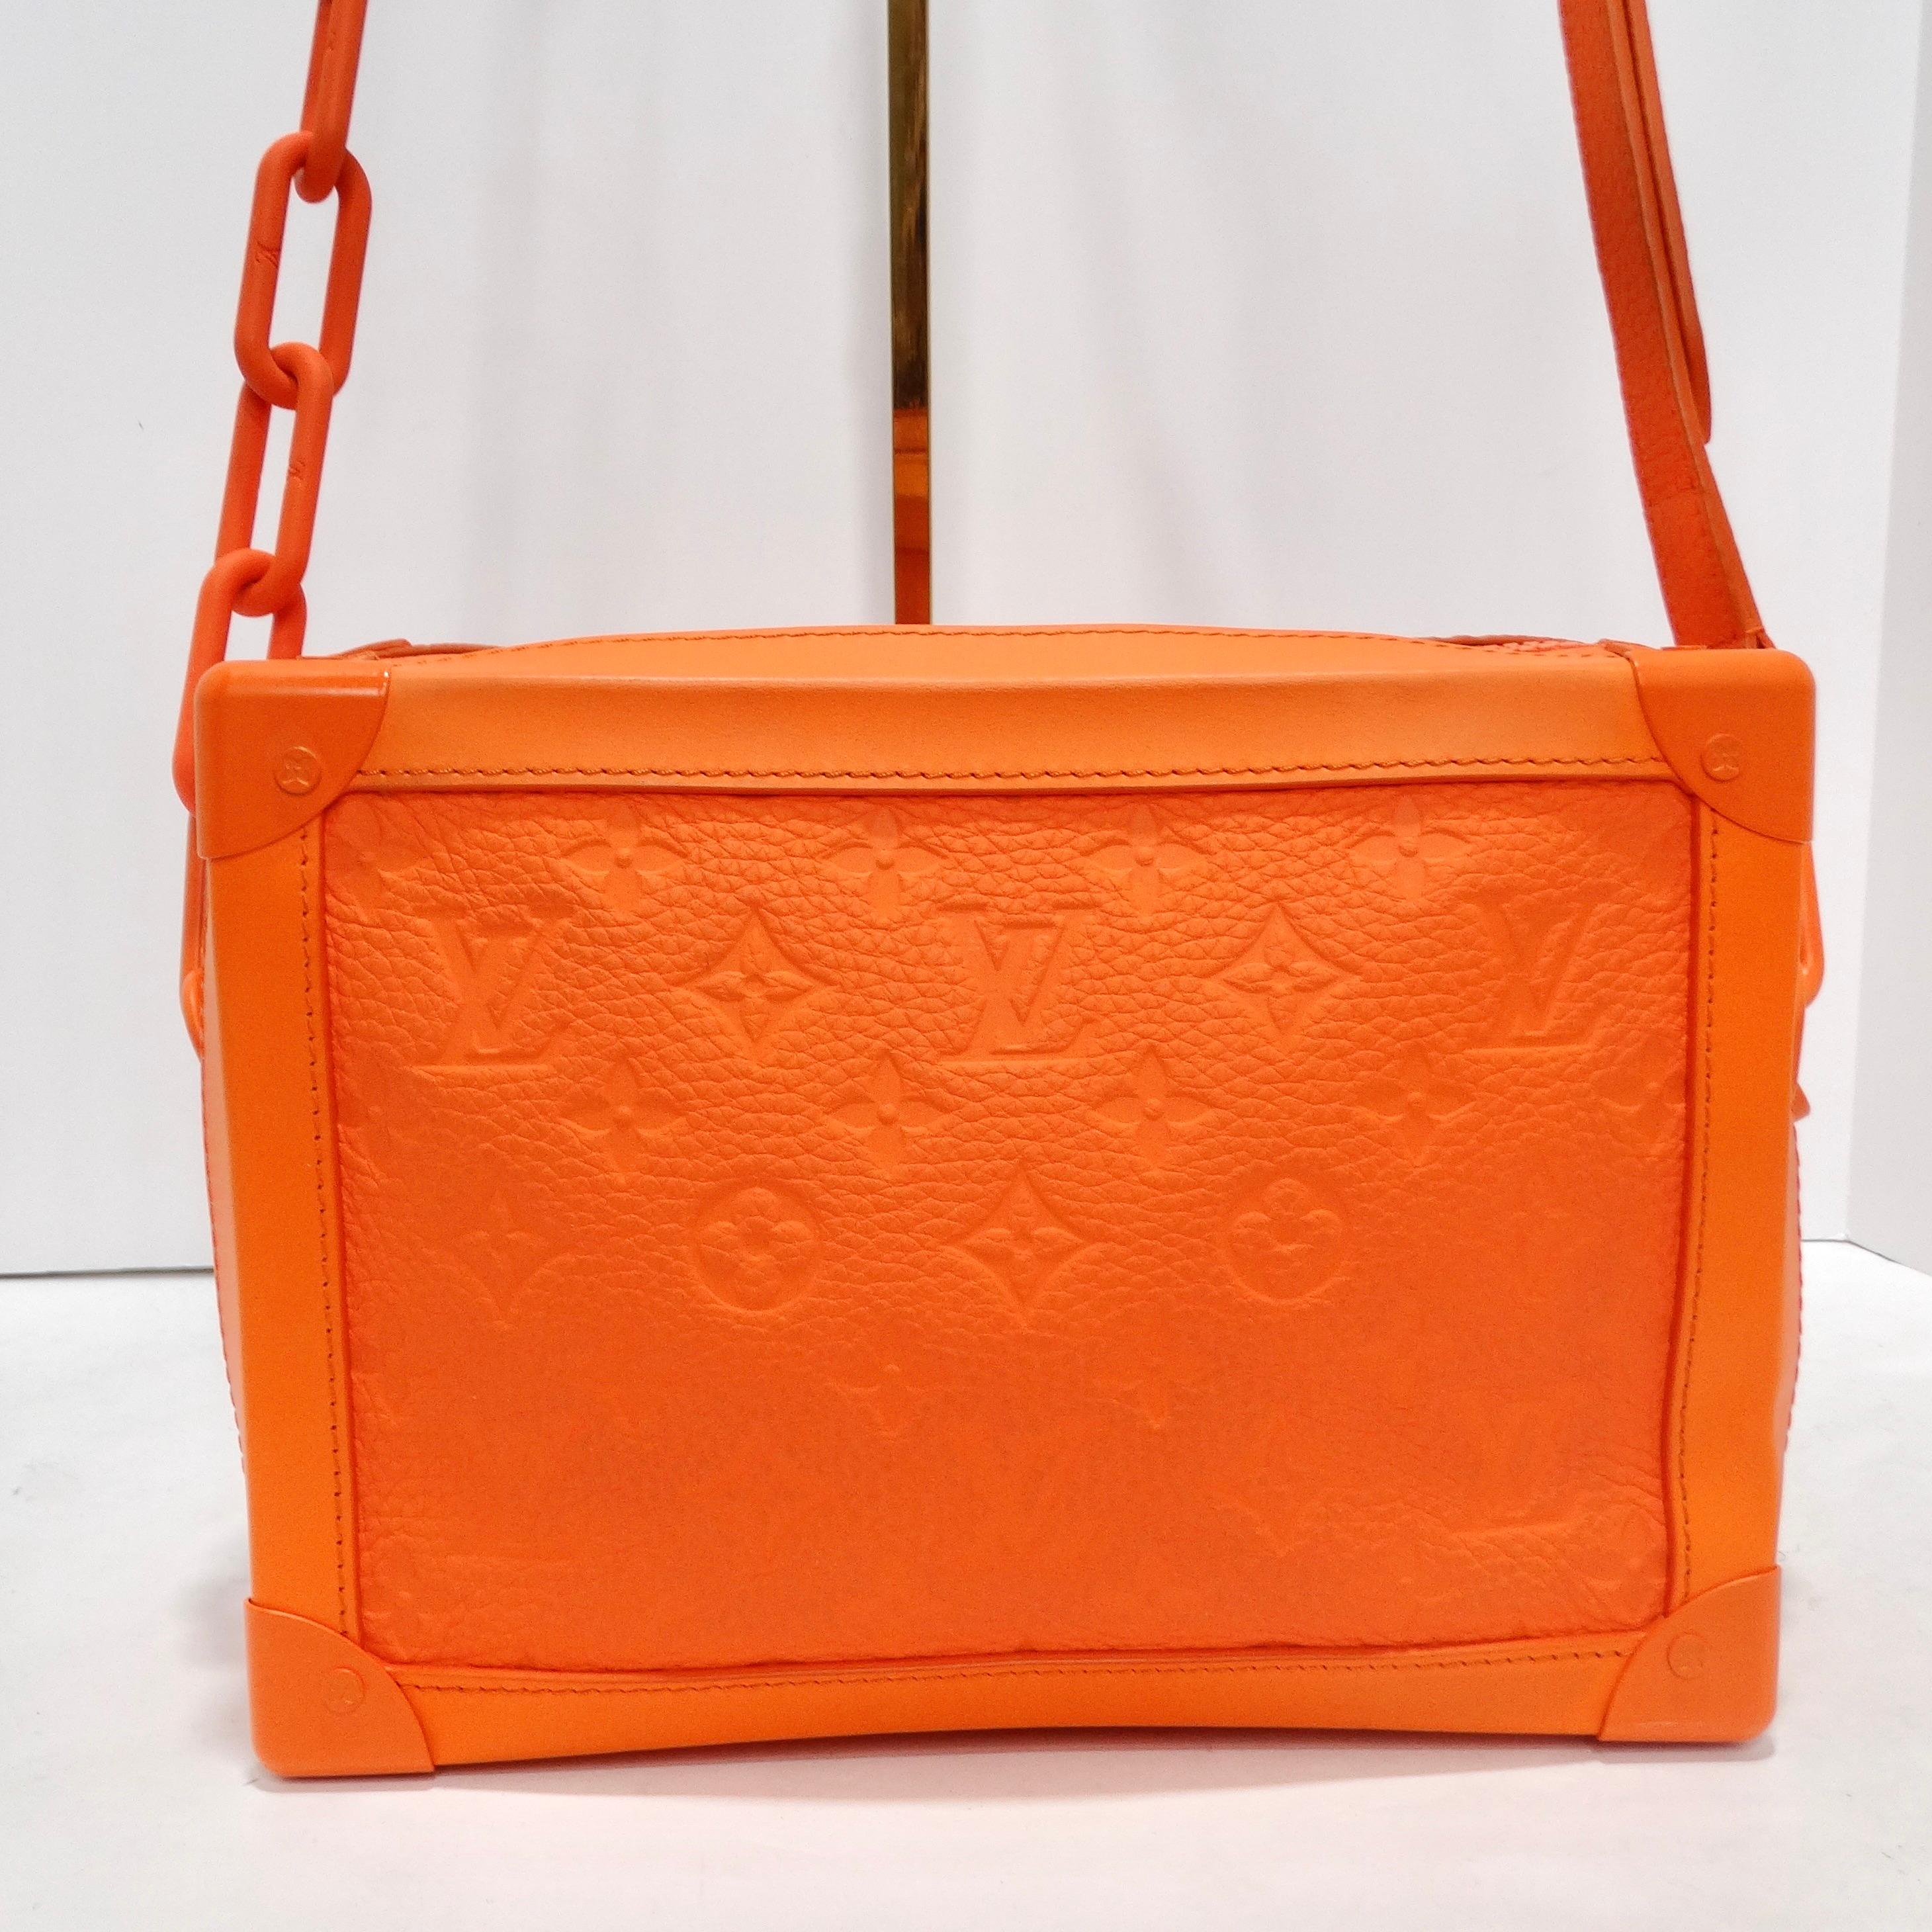 Immerse yourself in the epitome of luxury with the Louis Vuitton Monogram Soft Trunk in captivating orange. This incredible square mini trunk, crafted from bright orange monogram soft leather, is a testament to Louis Vuitton's commitment to